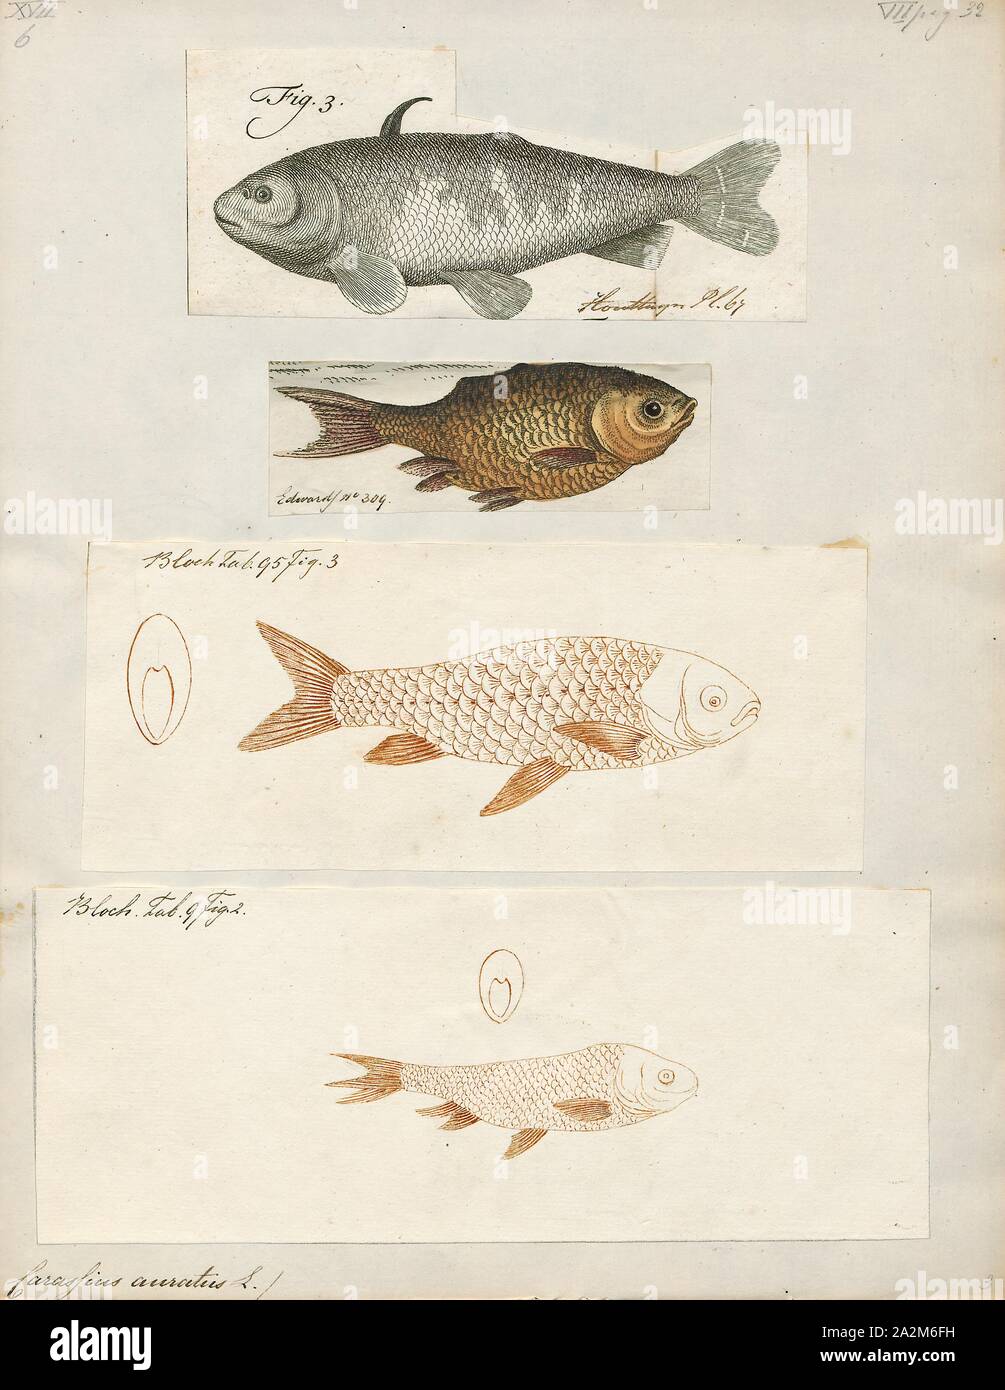 Carassius auratus, Print, The goldfish (Carassius auratus) is a freshwater fish in the family Cyprinidae of order Cypriniformes. It is one of the most commonly kept aquarium fish., 1700-1880 Stock Photo